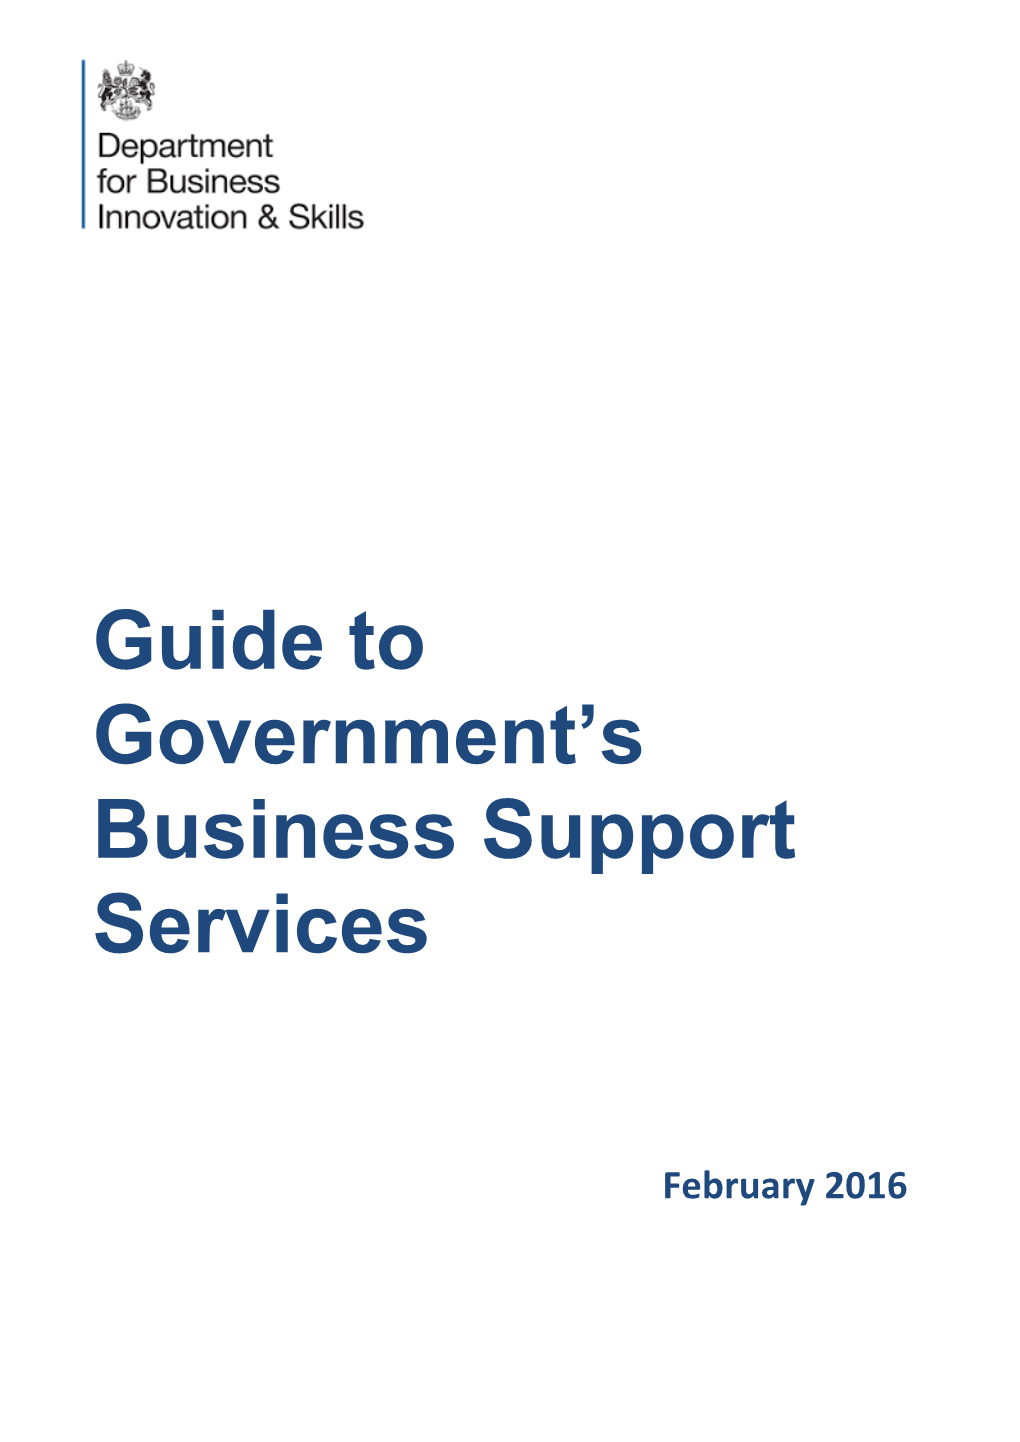 Guide to Government's Business Support Services